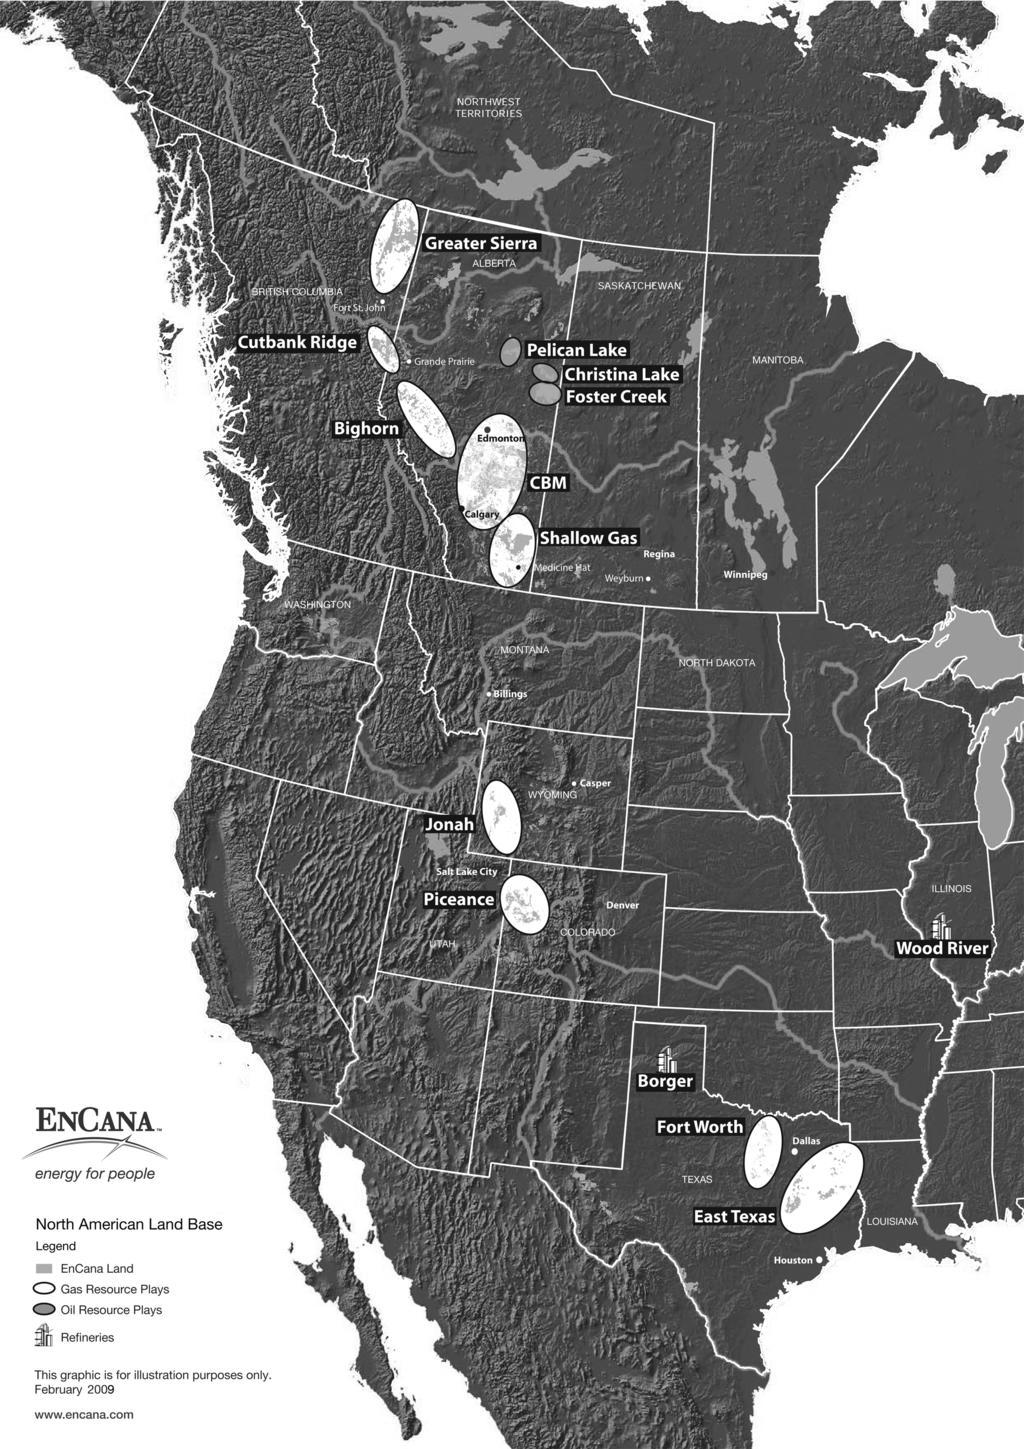 NARRATIVE DESCRIPTION OF THE BUSINESS The following map outlines EnCana s onshore North America landholdings and key